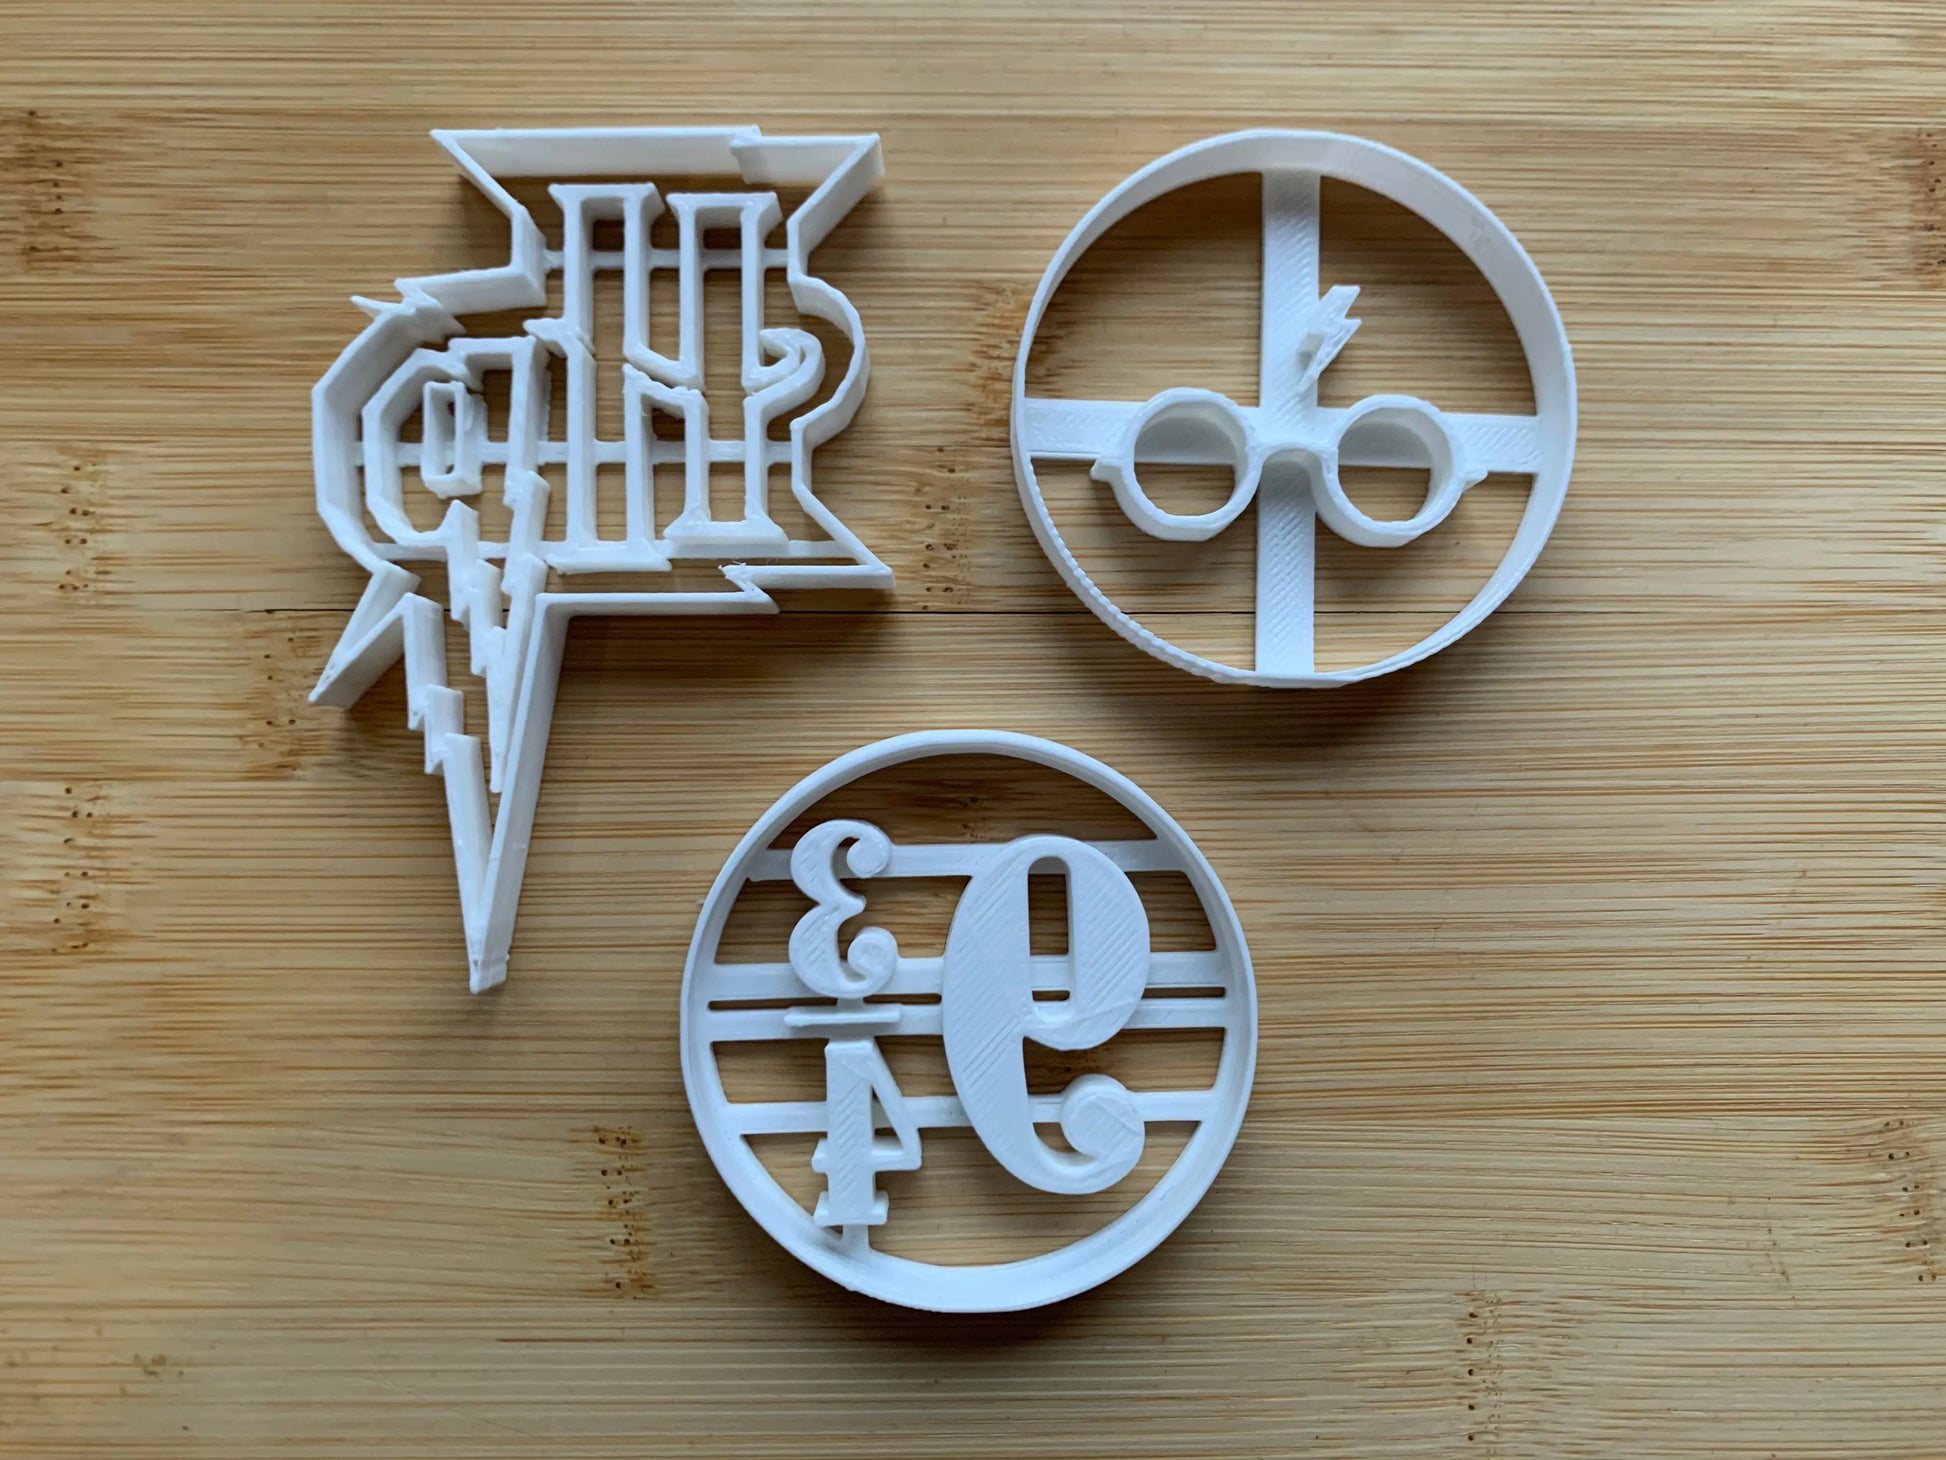 Harry Potter Cookie Cutter Set of 5 Includes Hermione Granger, Ron Weasley,  Rubeus Hagrid, Griffin. Works for Fondant, Play Doh Polymer Clay 